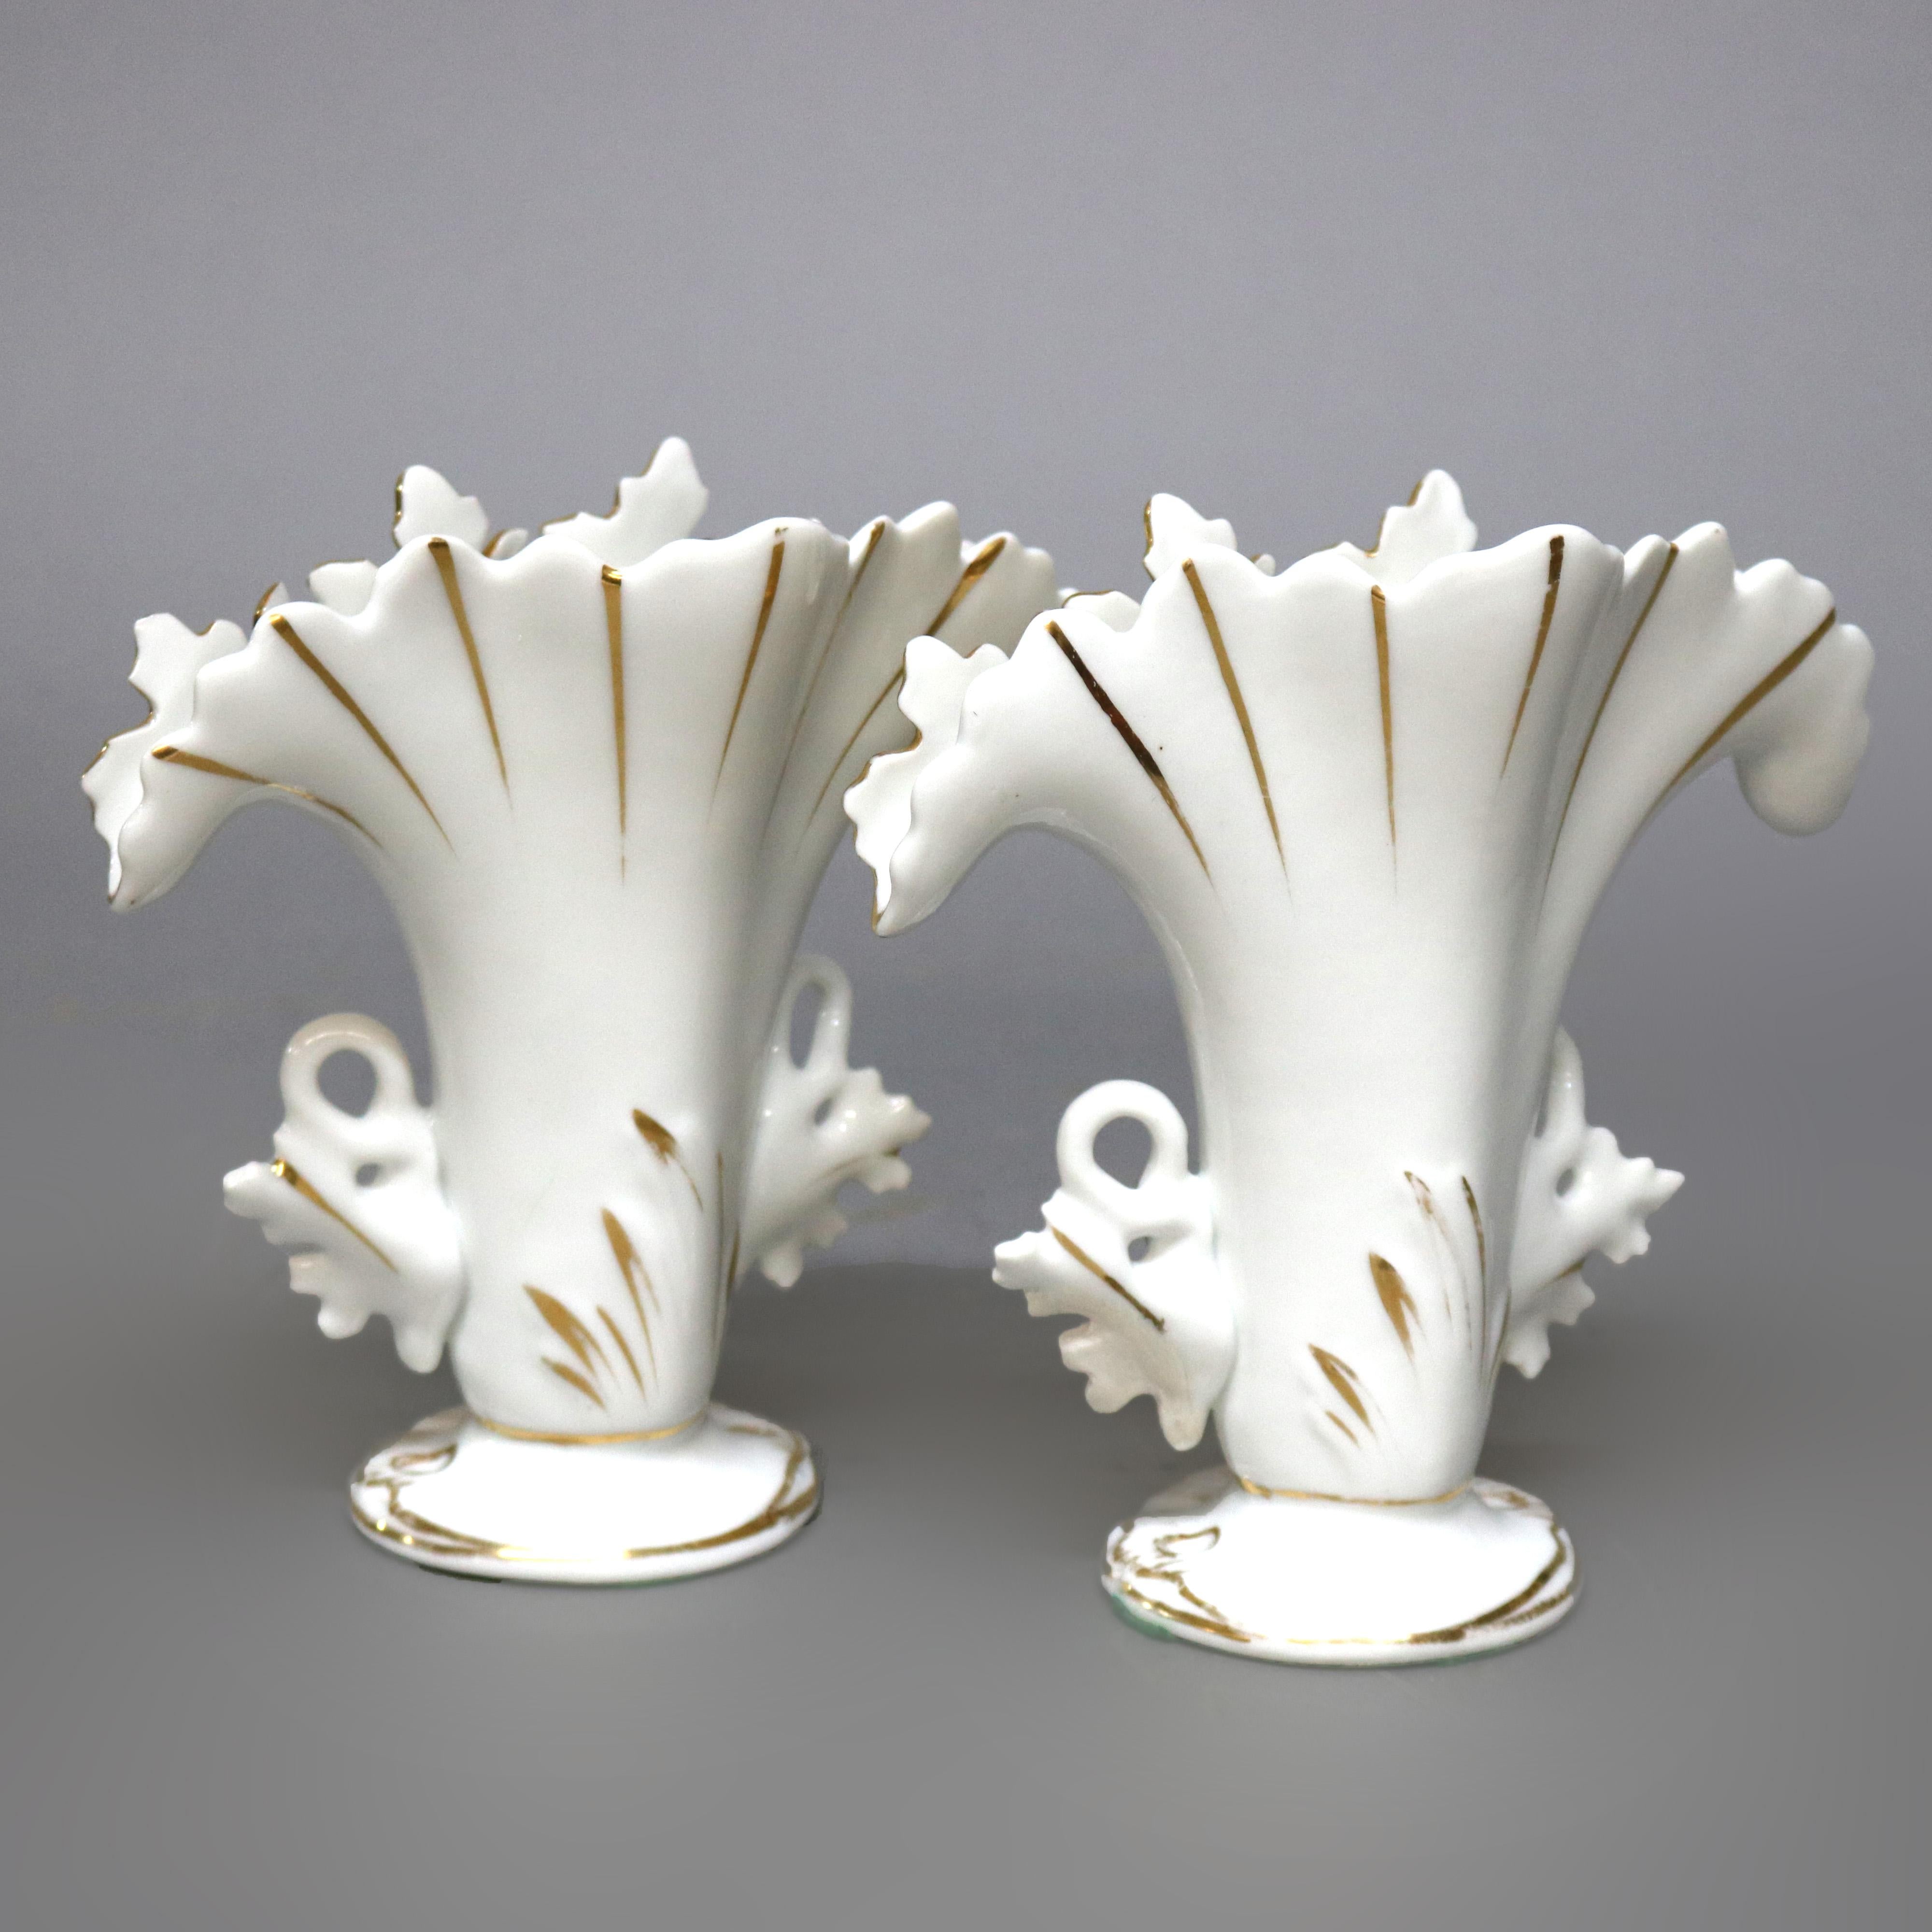 19th Century Antique Pair of French Old Paris Porcelain Gilt Decorated Spill Vases circa 1880